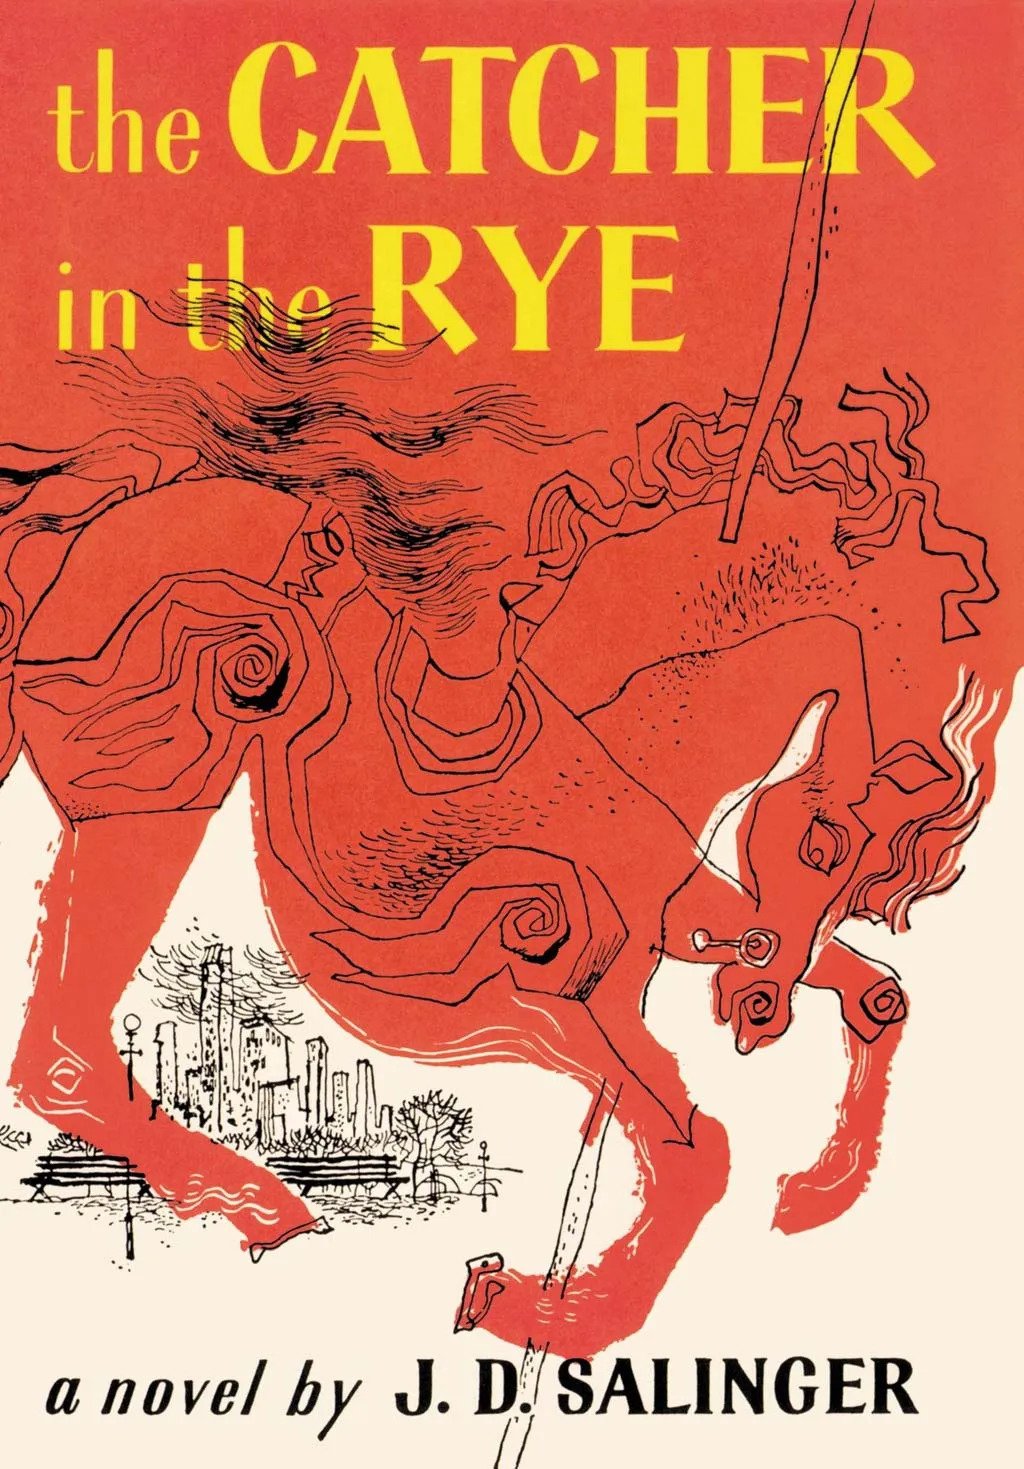 Book Review: The Catcher in the Rye